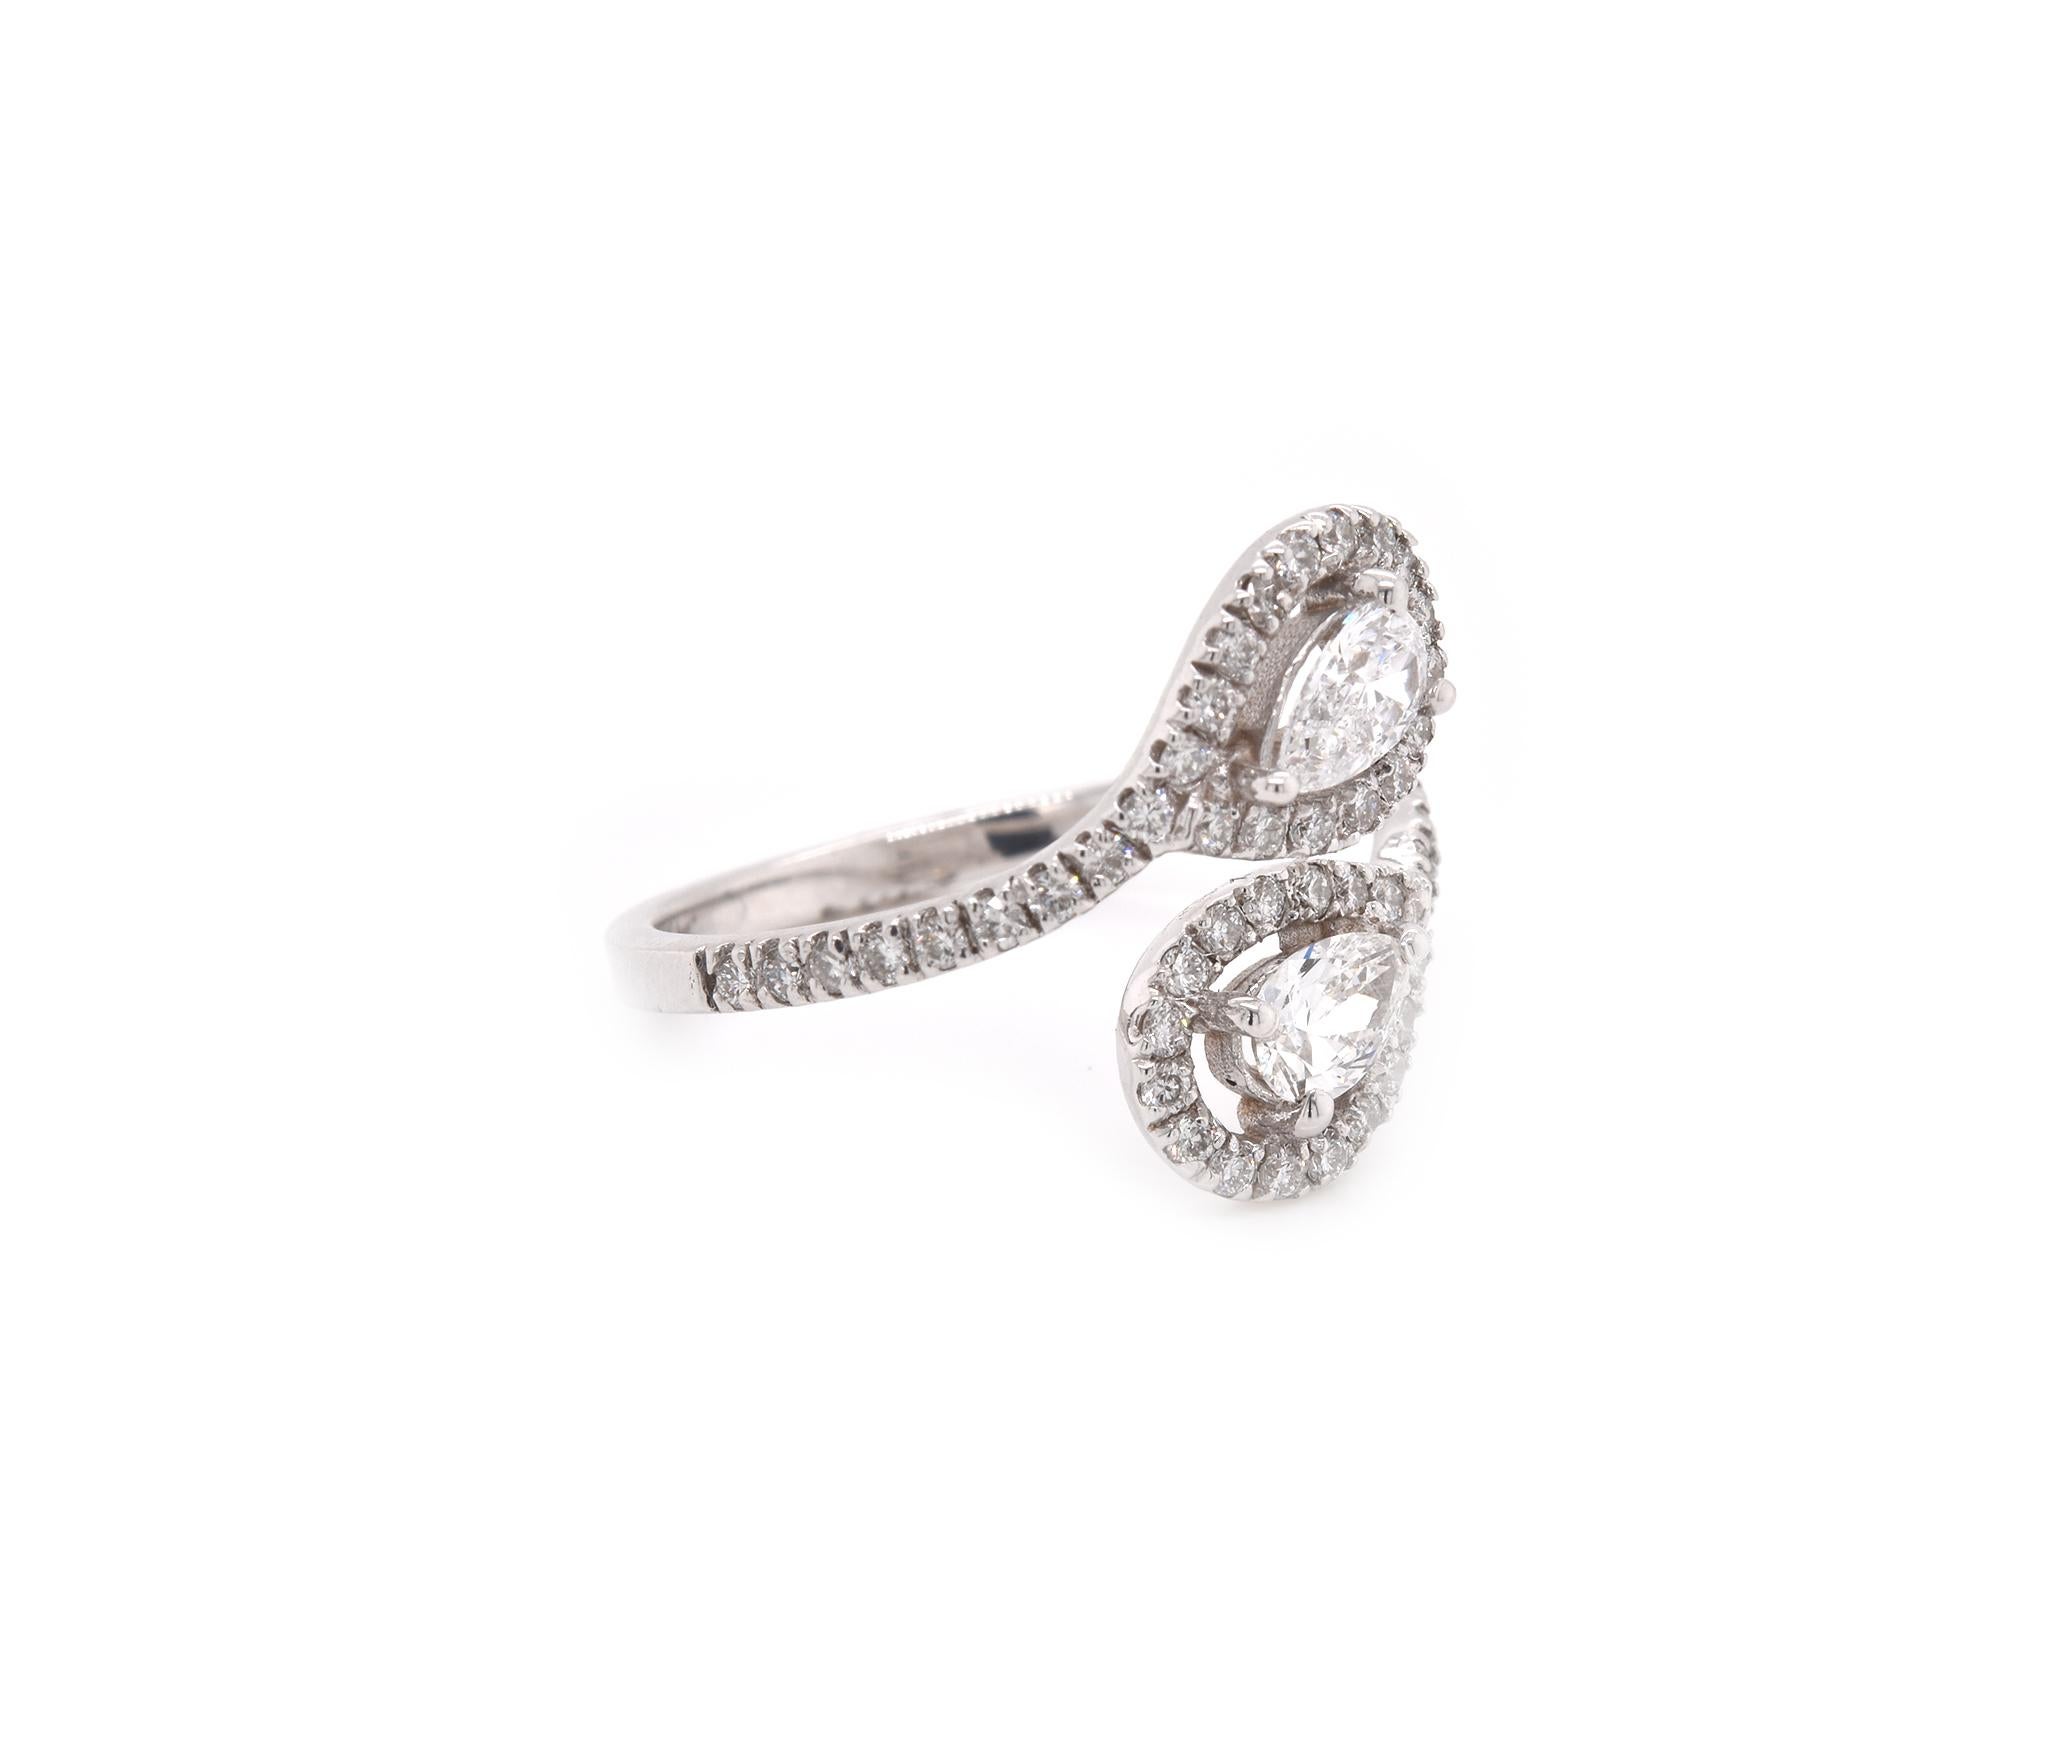 Material: 14k white gold
Pear Diamonds: 2 pear cut diamonds = 0.48cttw
Color: G
Clarity: SI1
Accent Diamonds: round brilliant cuts = 0.38cttw
Ring size: 7 ½ (please allow two additional shipping days for sizing requests)
Dimensions: ring measures